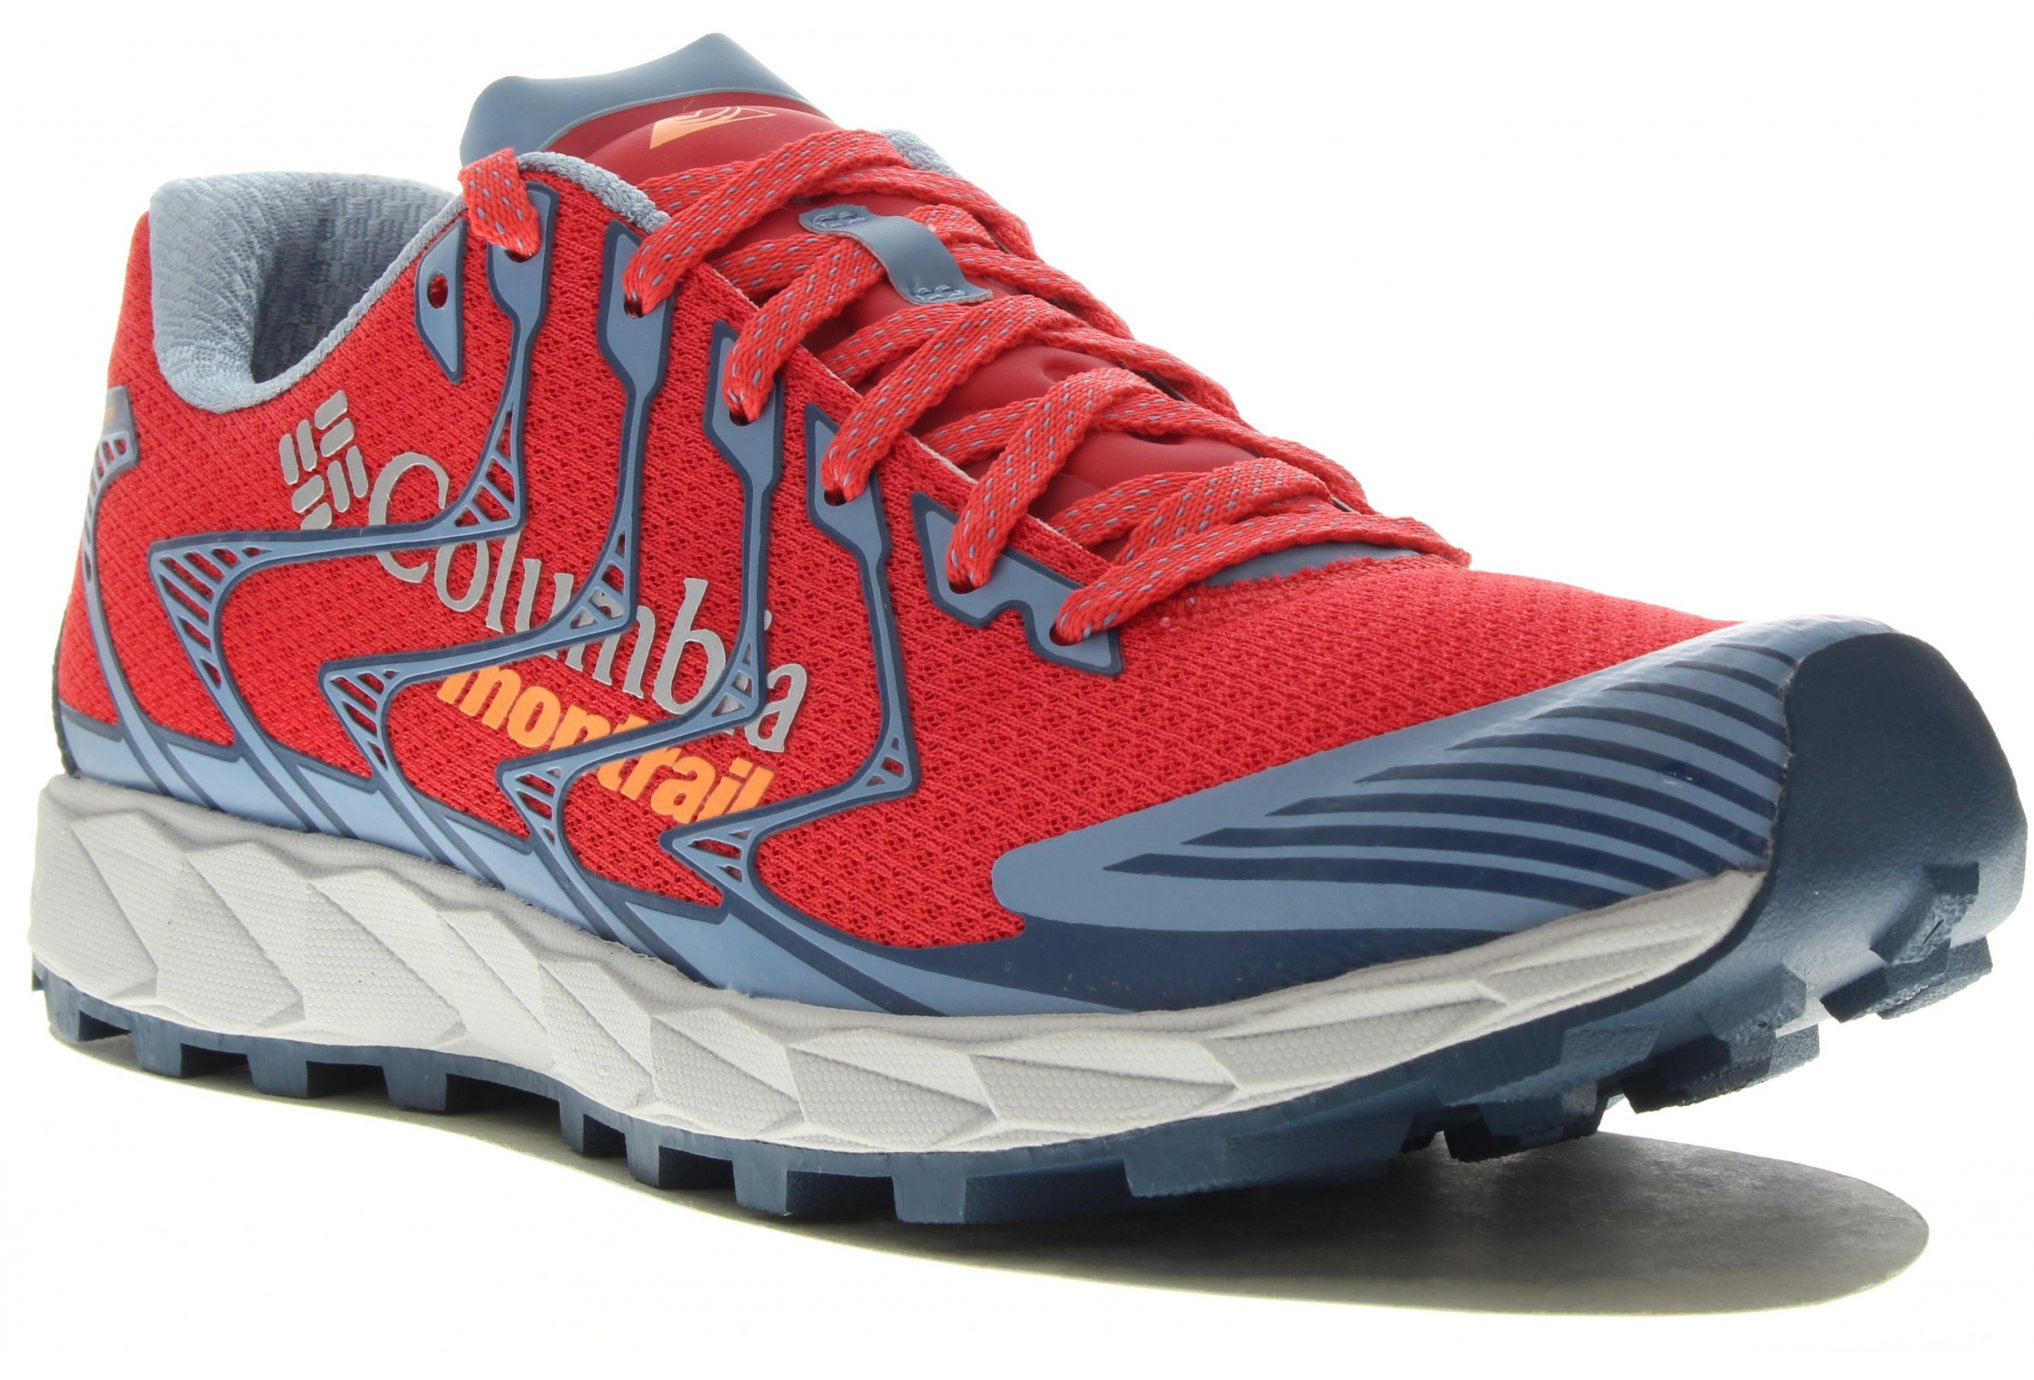 Columbia Montrail rogue f.K.t. ii w dittique chaussures femme